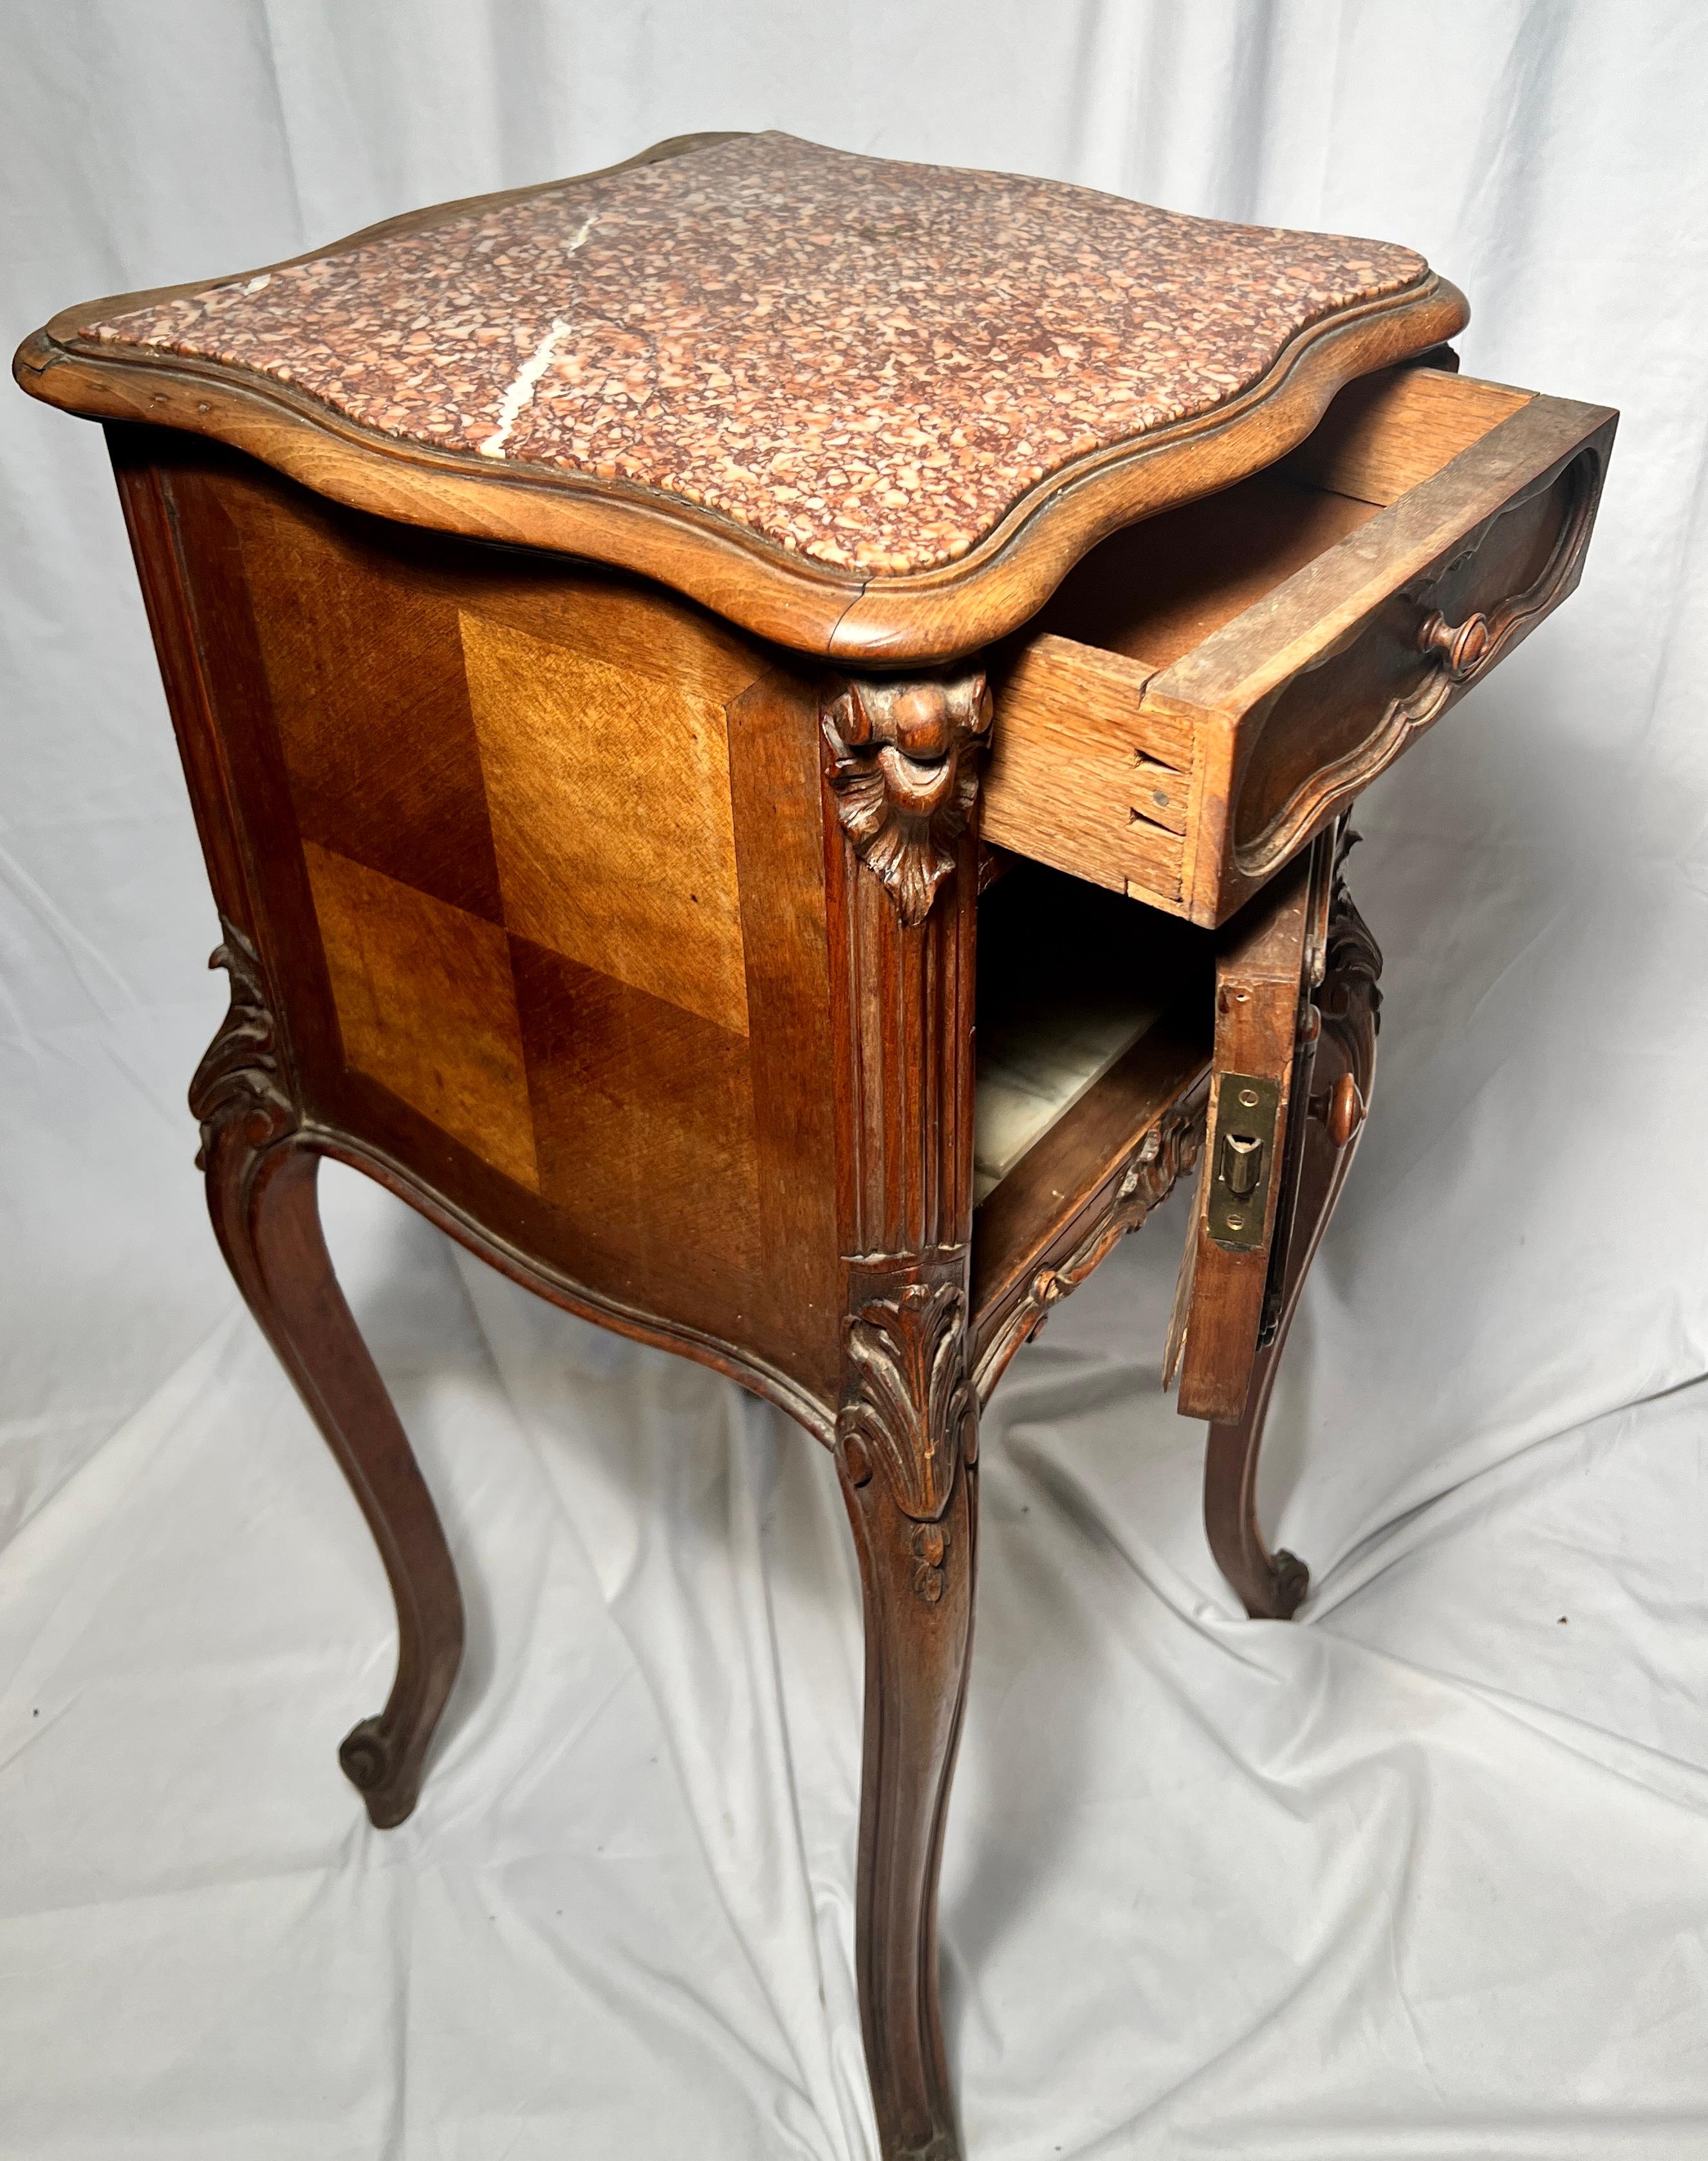 A very handsome little beside or occasional table/cabinet.